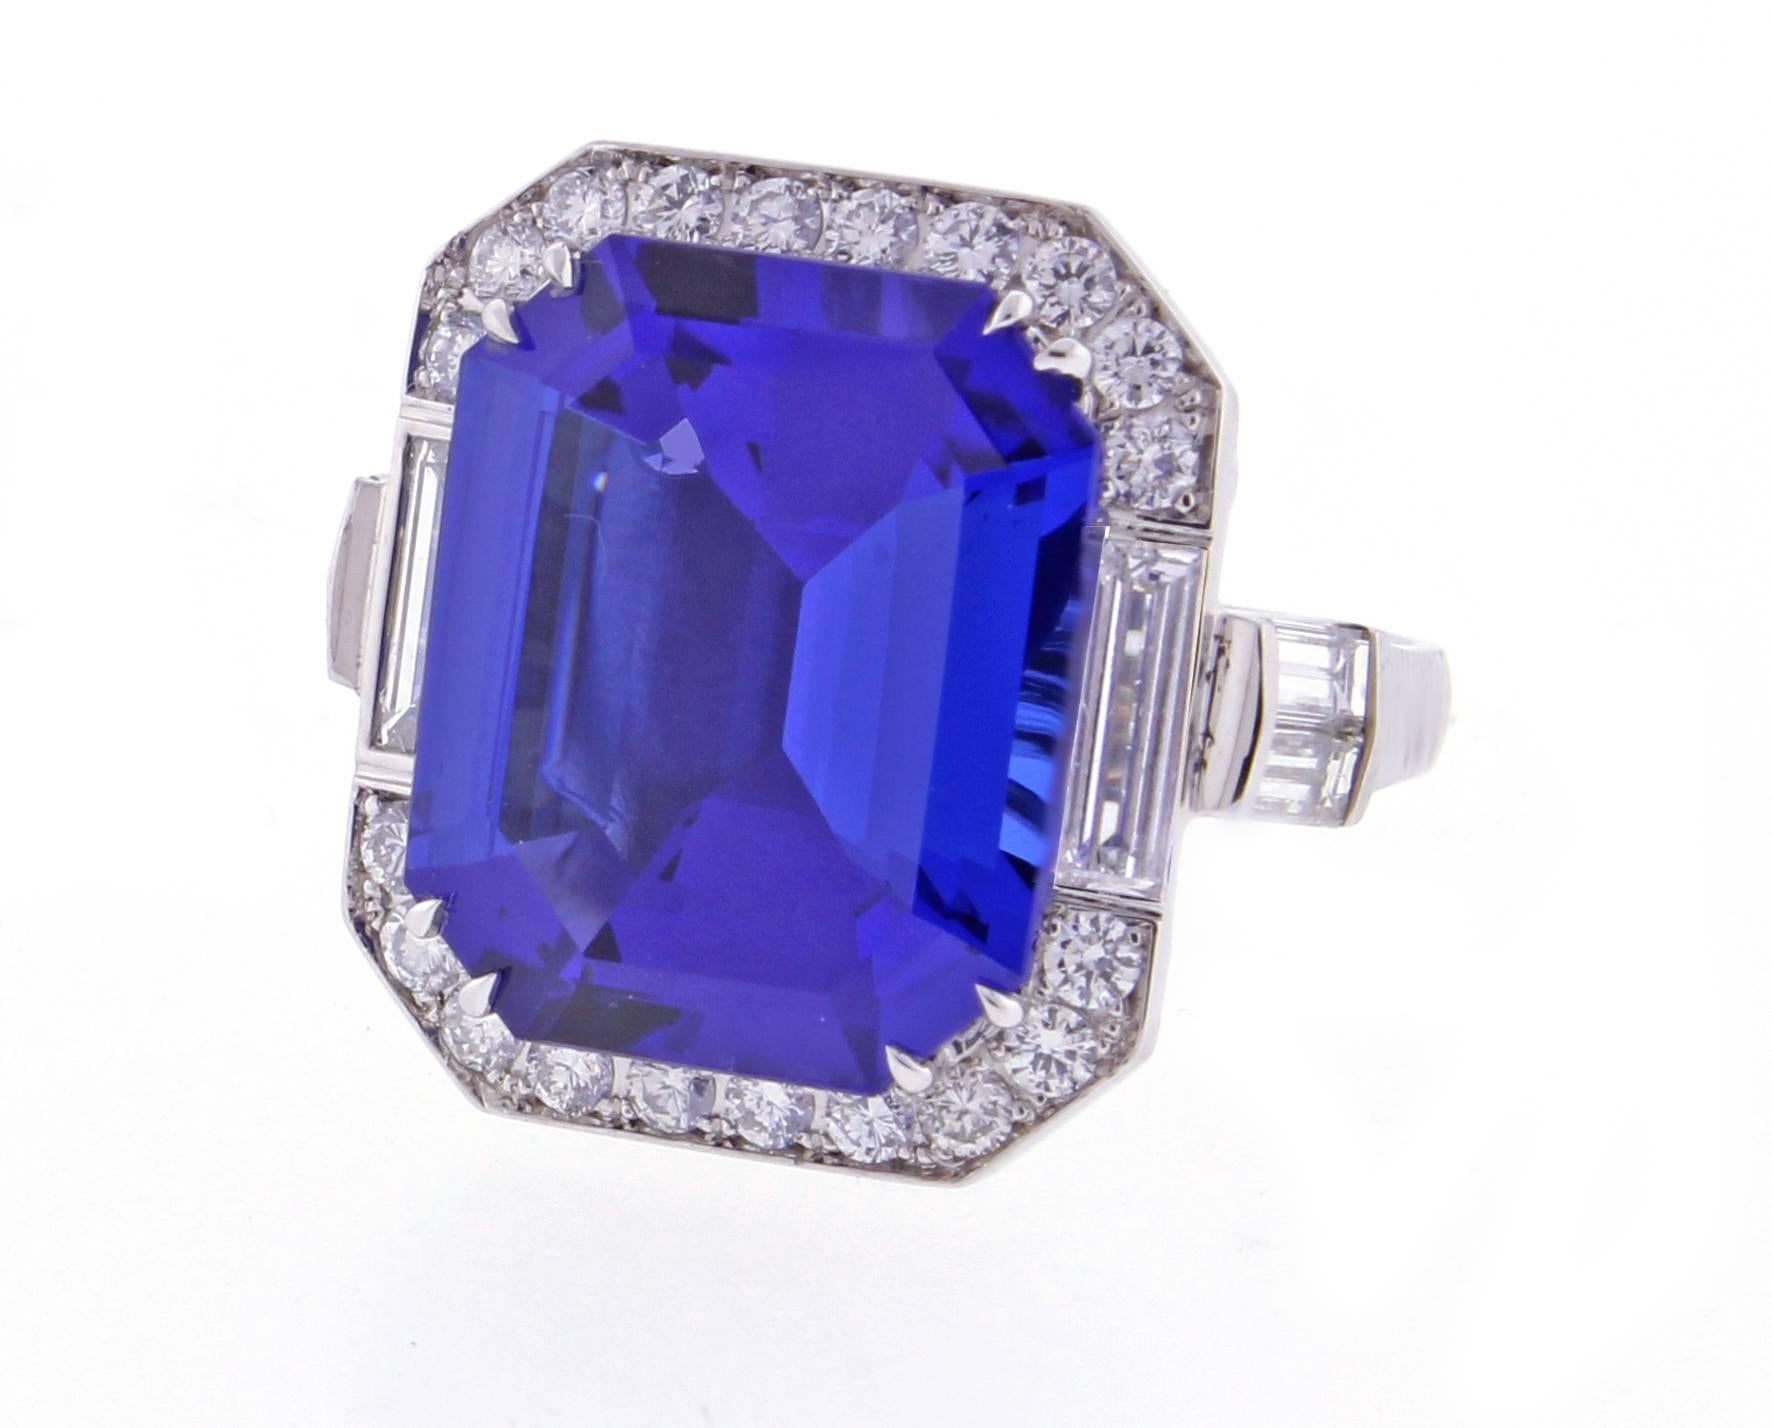 From the master ring makers of Pampillonia Jewelers, a Tanzanite and diamond handmade platinum ring. The emerald cut  rich violet blue Tanzanite weights 12.03. There are .51 carats of round diamonds and .89 carats of baguette diamonds. This ring is